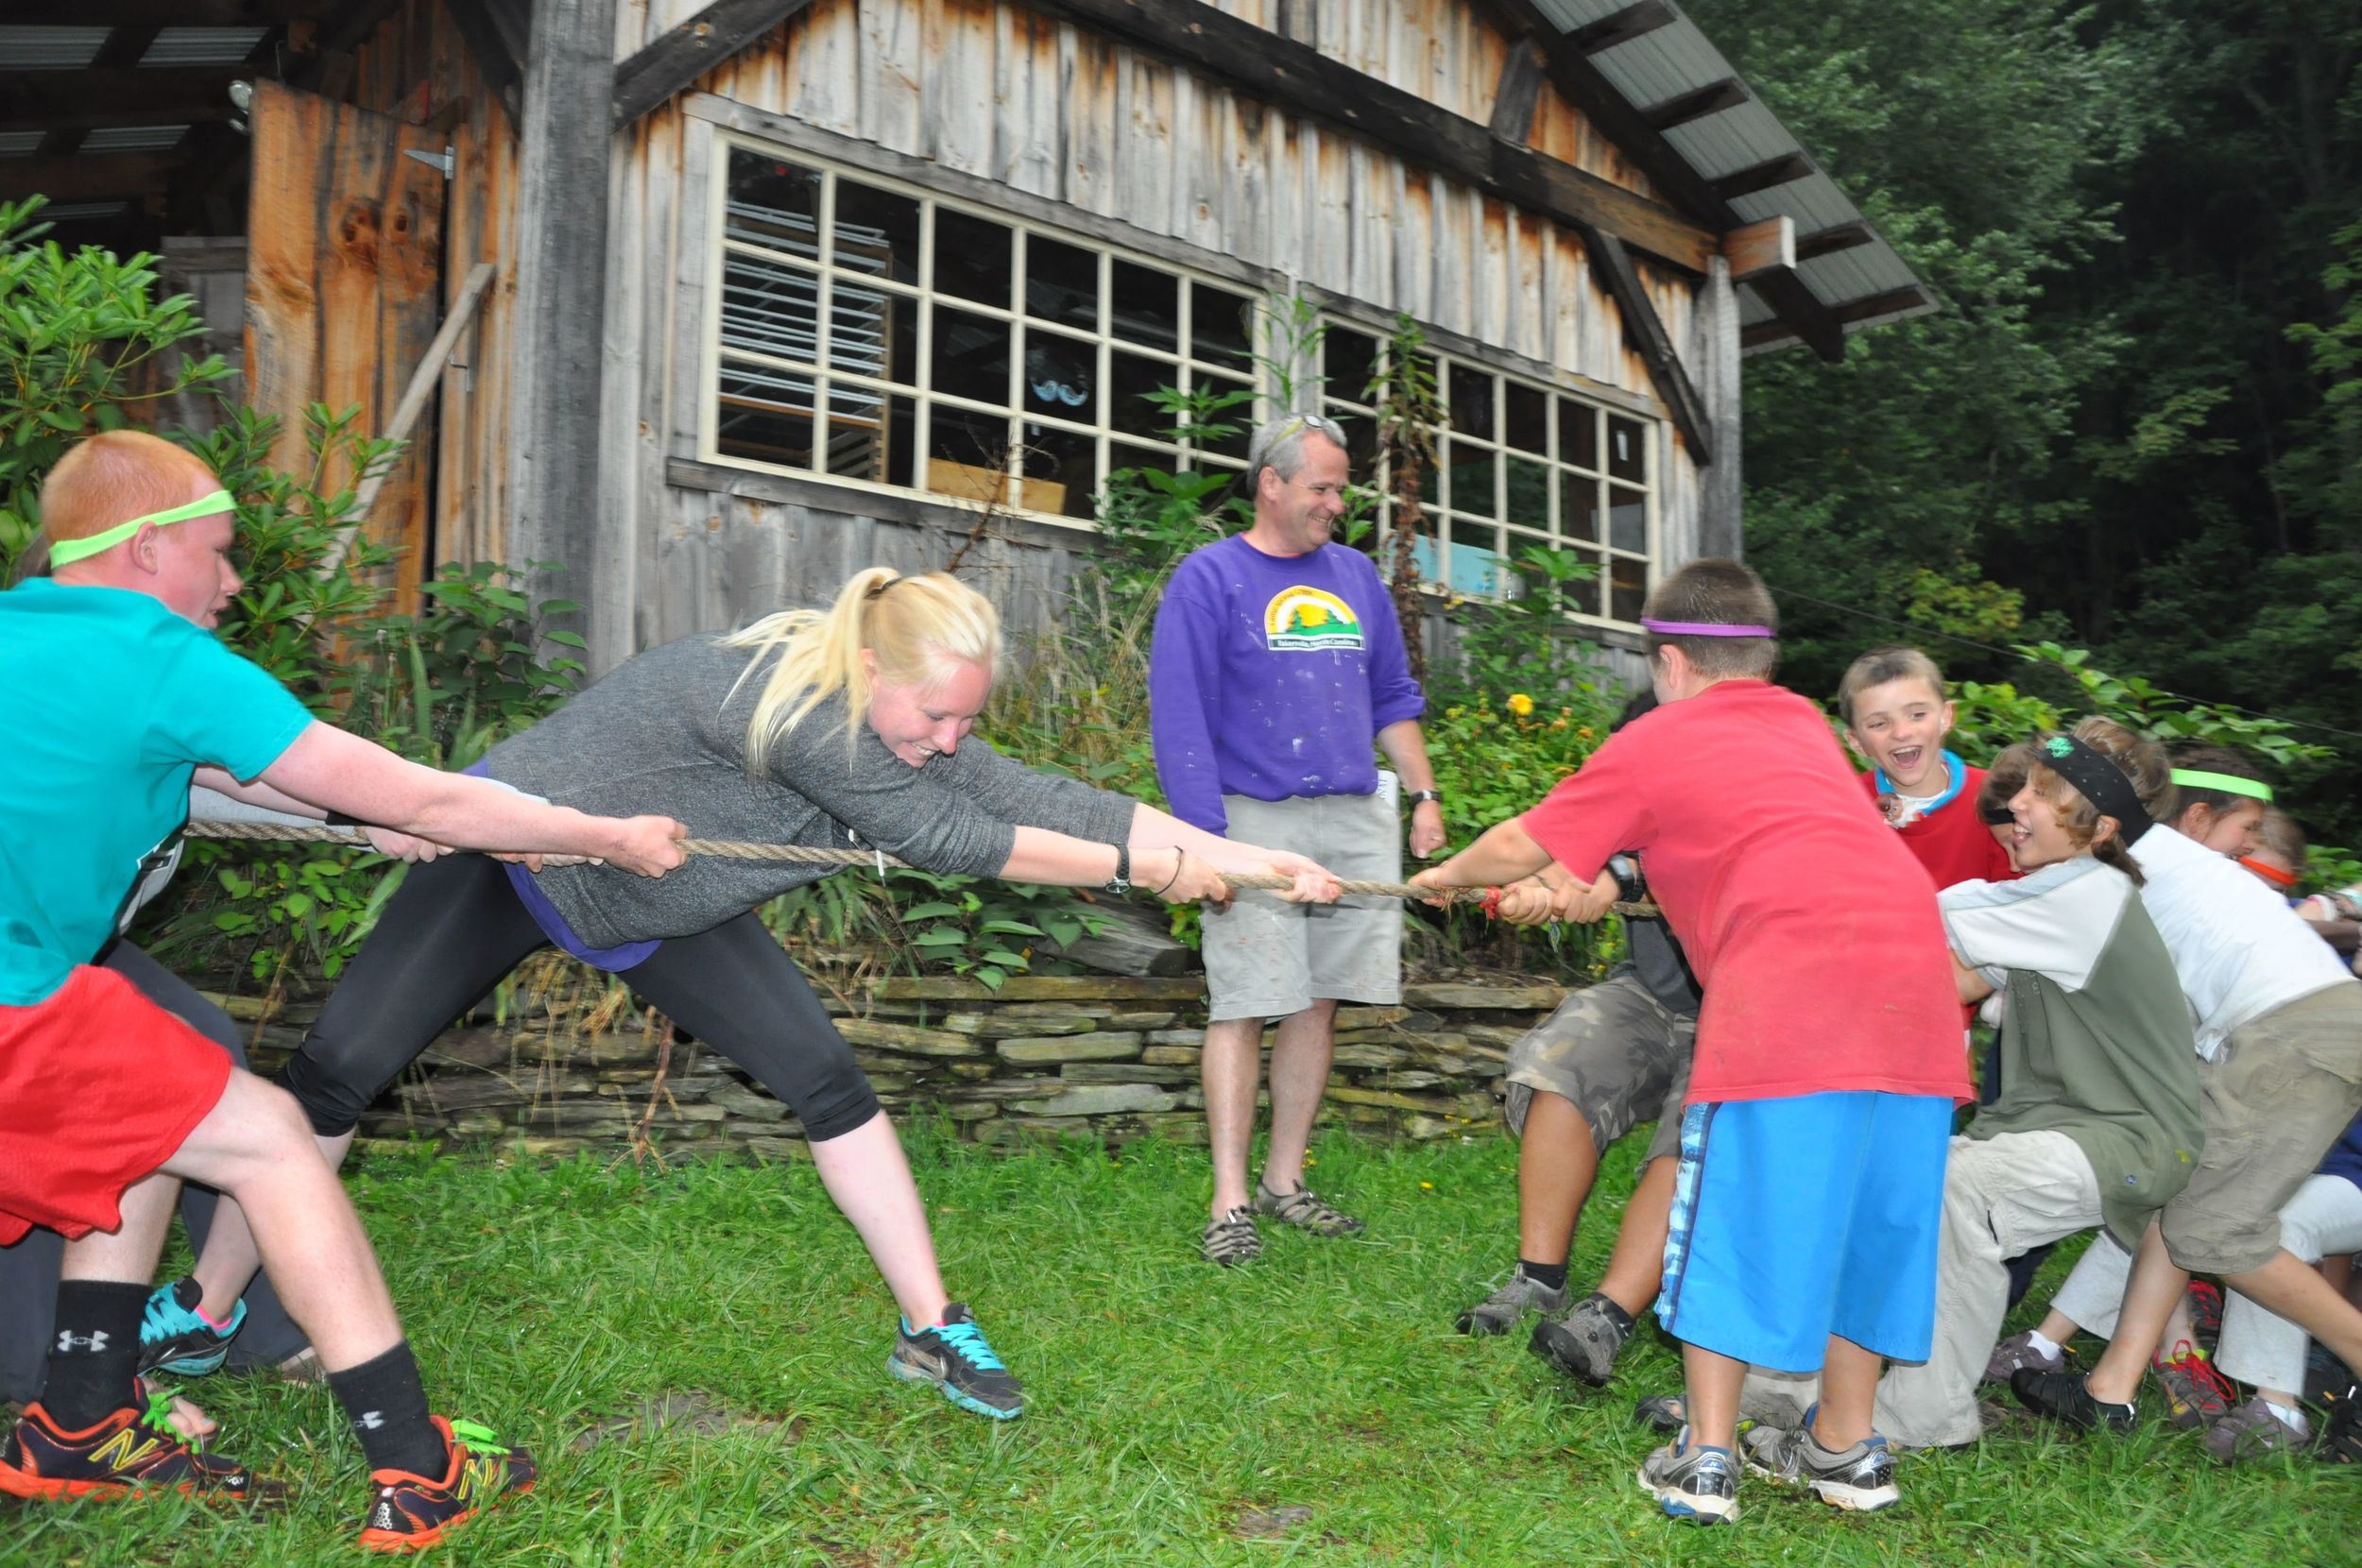 tug-of-war-counselors-versus-campers-after-a-very-even-match-the-counselors-held-on-a-little-longer-and-won-the-match.jpg